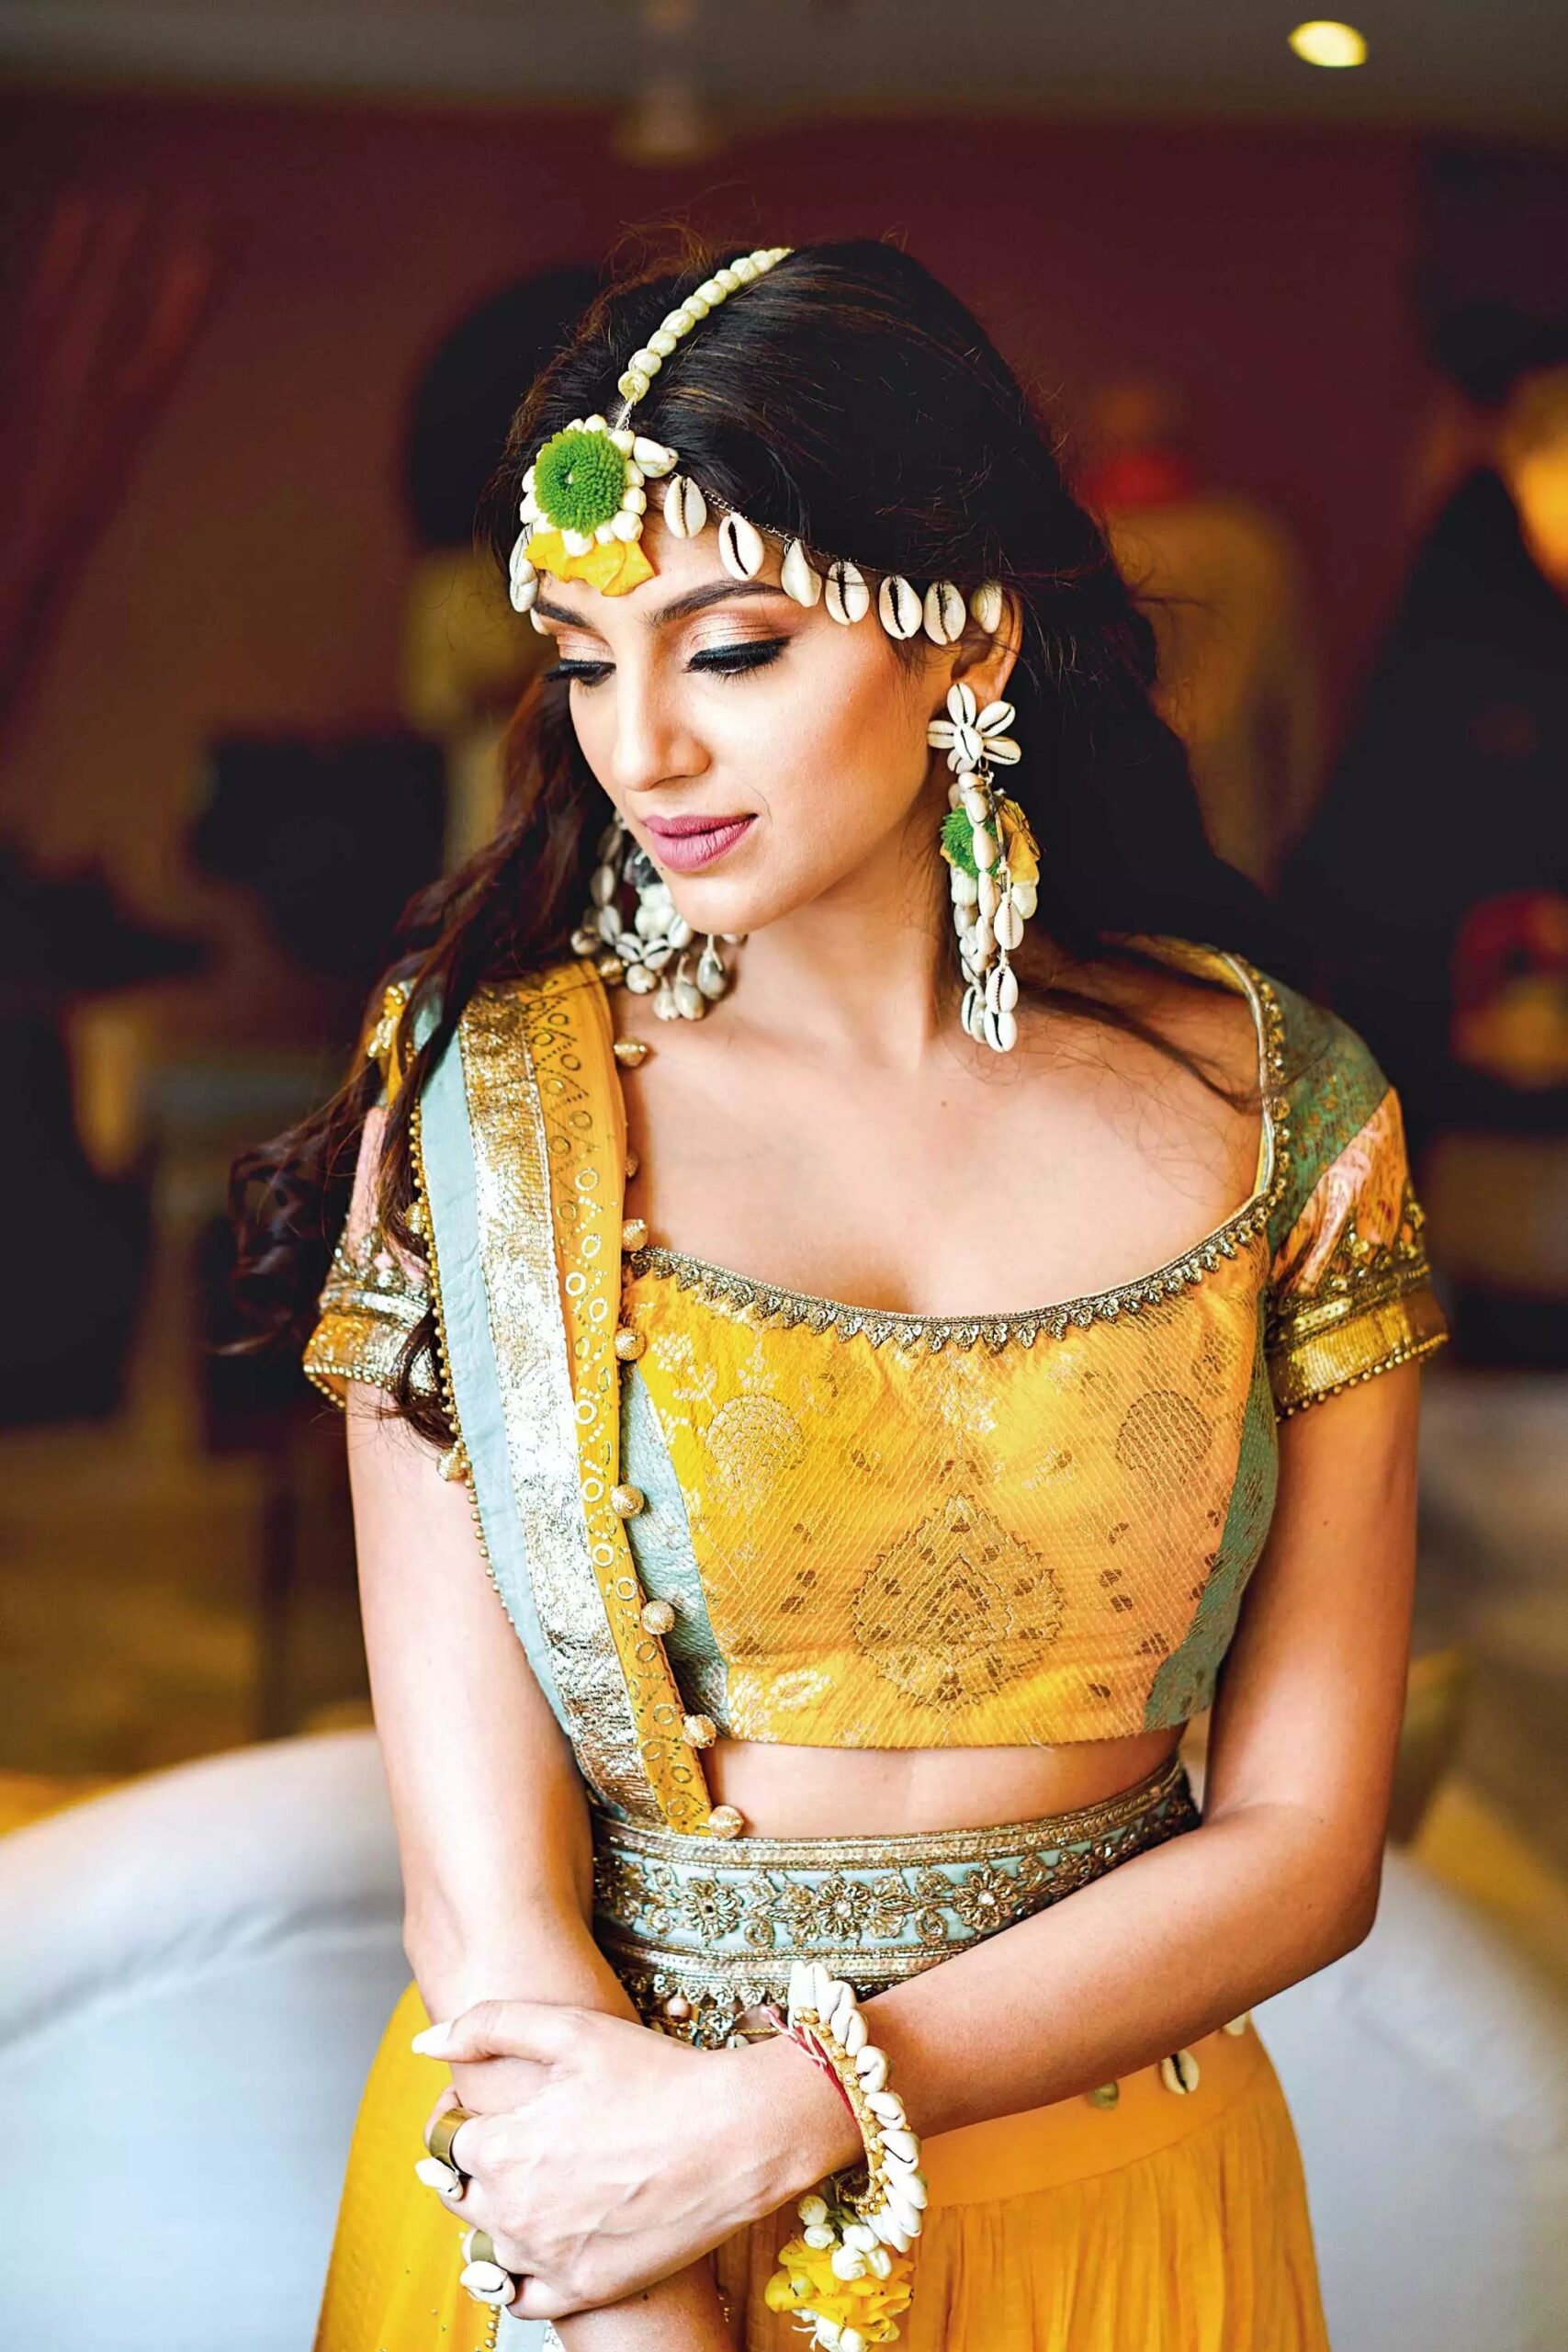 Best Hairstyle For A Wedding Mehndi And Haldi With Floral  Tikli